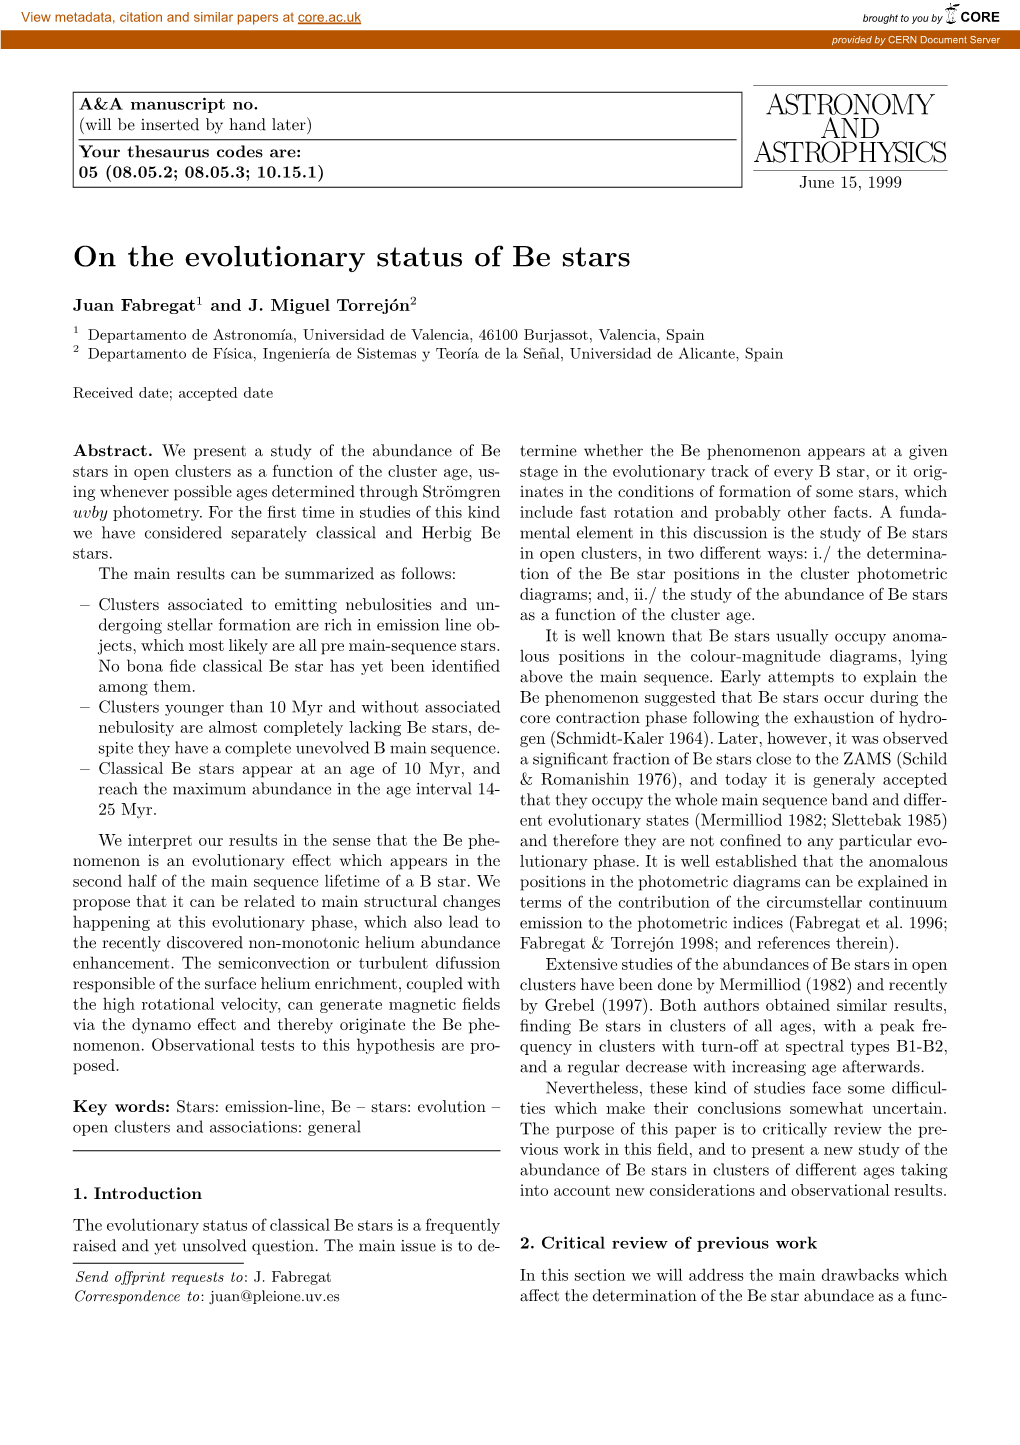 ASTRONOMY and ASTROPHYSICS on the Evolutionary Status